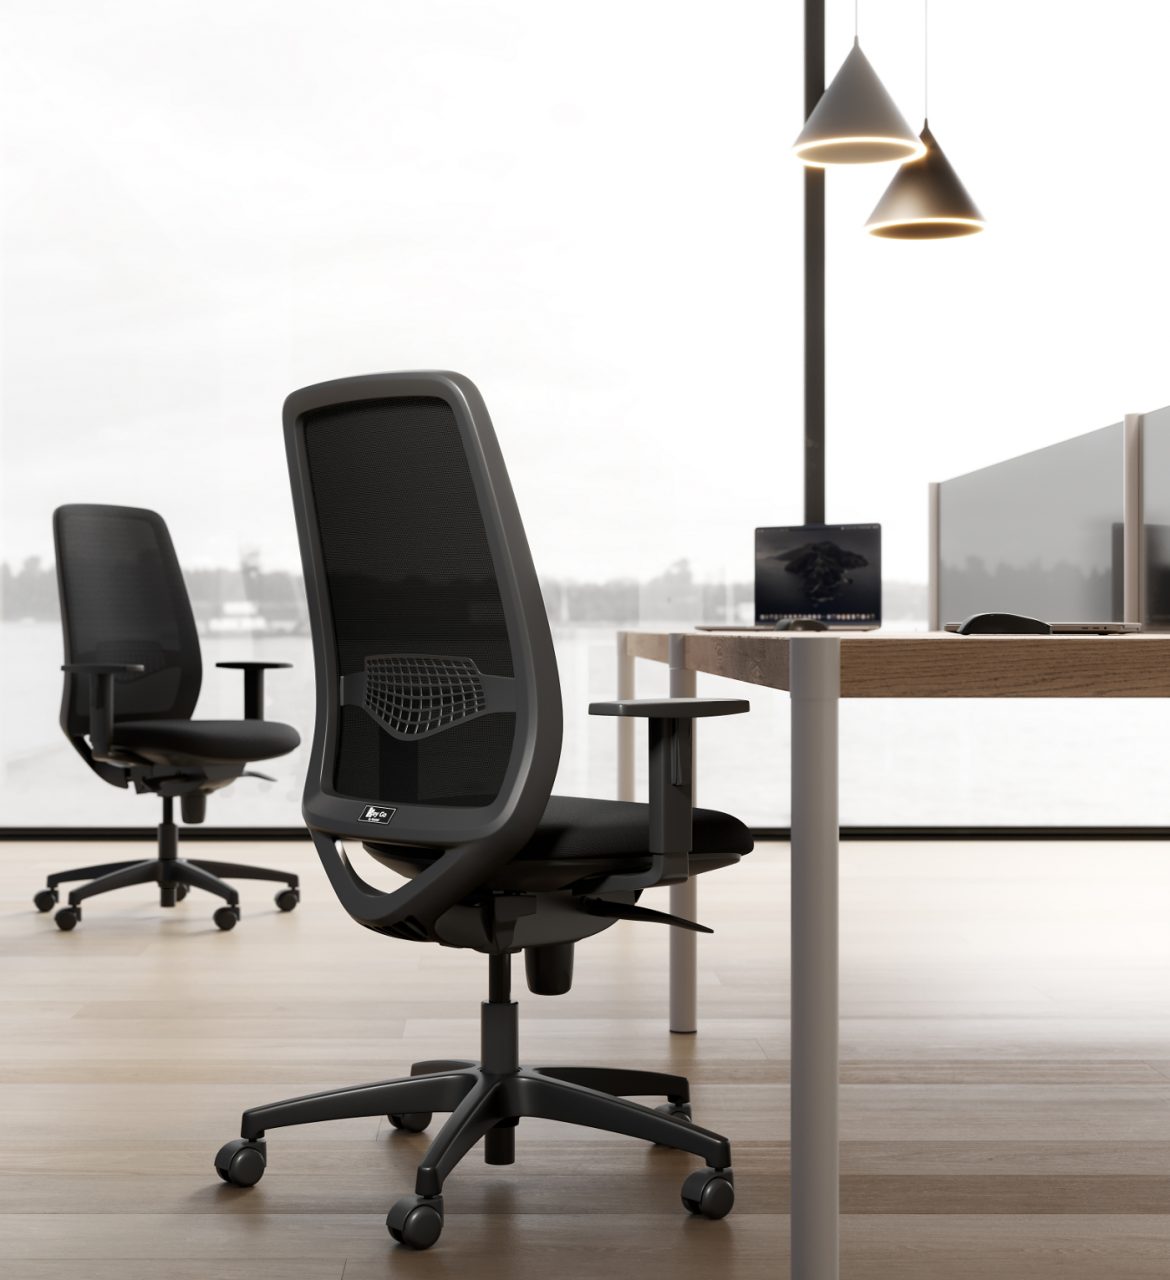 Enhancing Comfort at Work: The Science of Thermal Comfort in Office Chairs